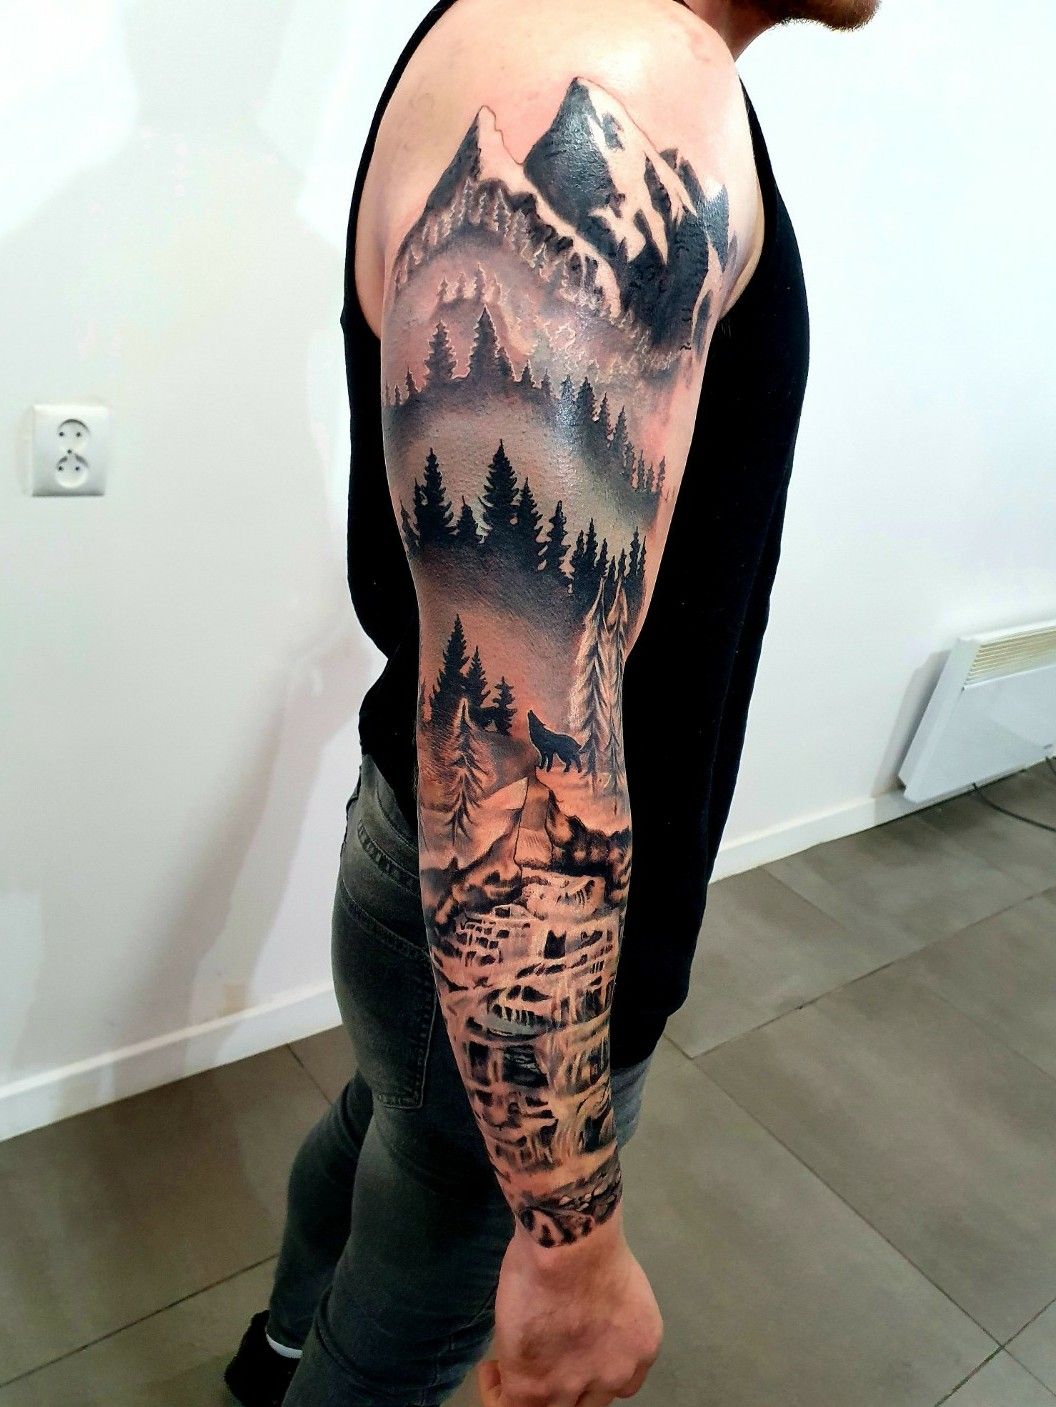 Nathan m tattoos  Surreal eye waterfall part of a full wrap around lower  leg sleeve  Facebook